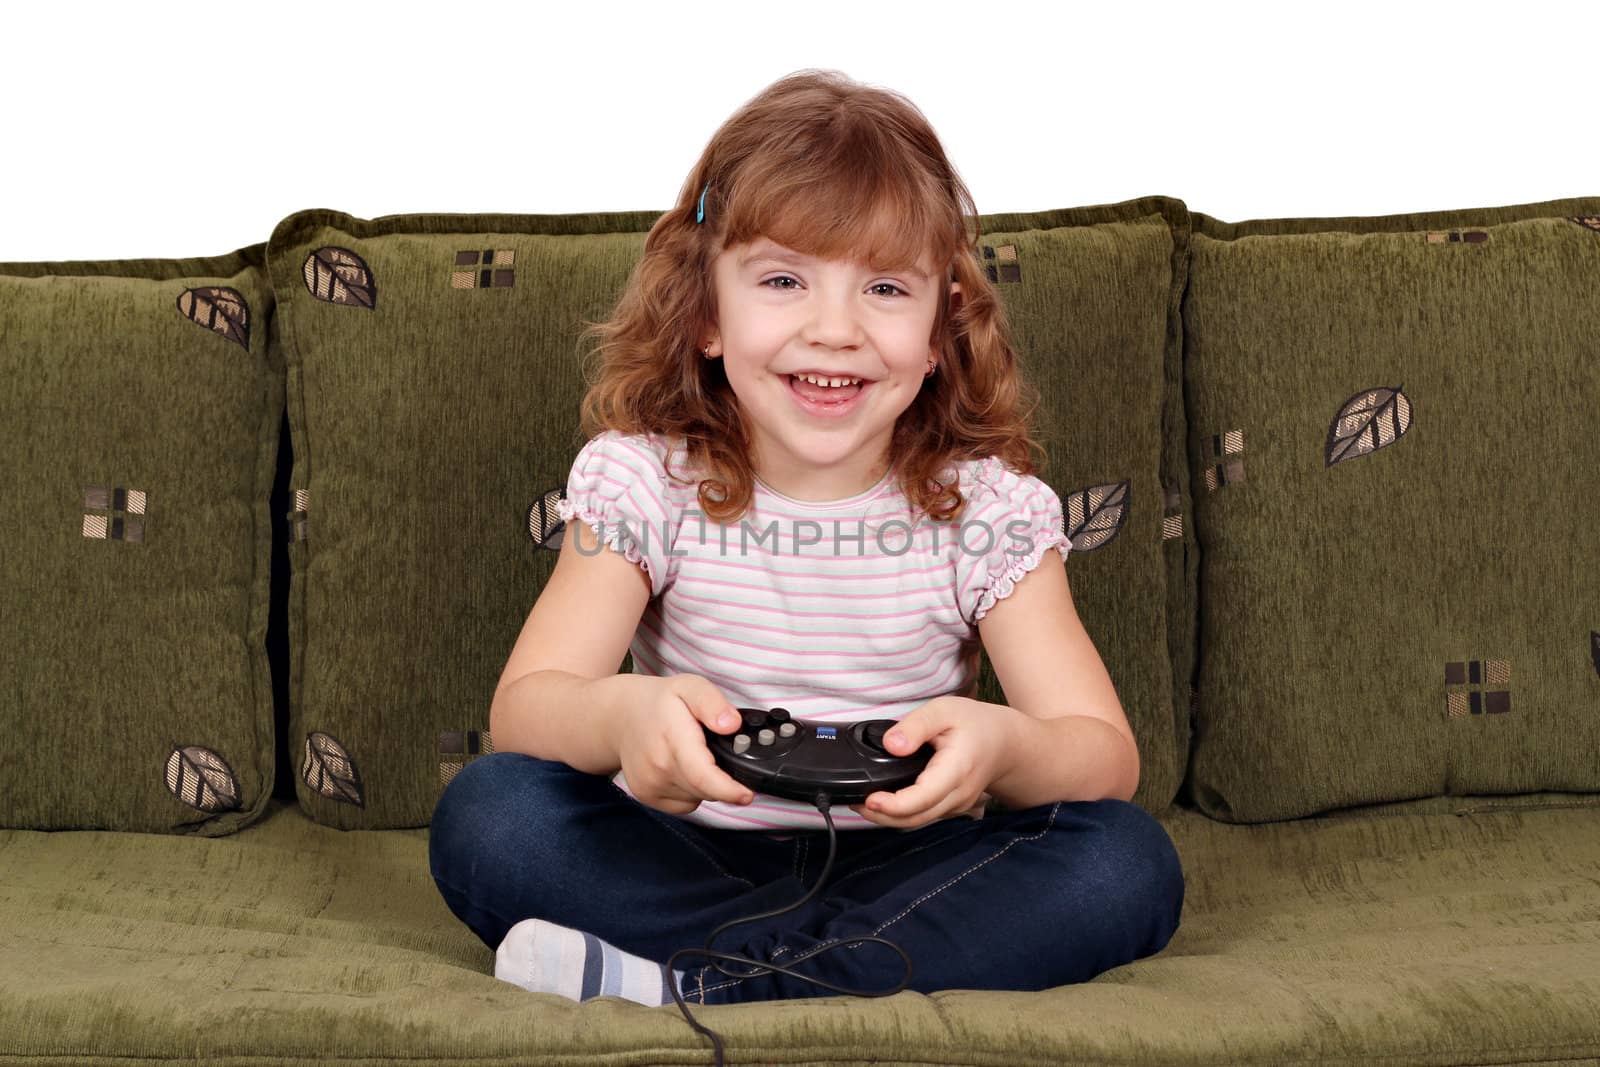 happy little girl play video game